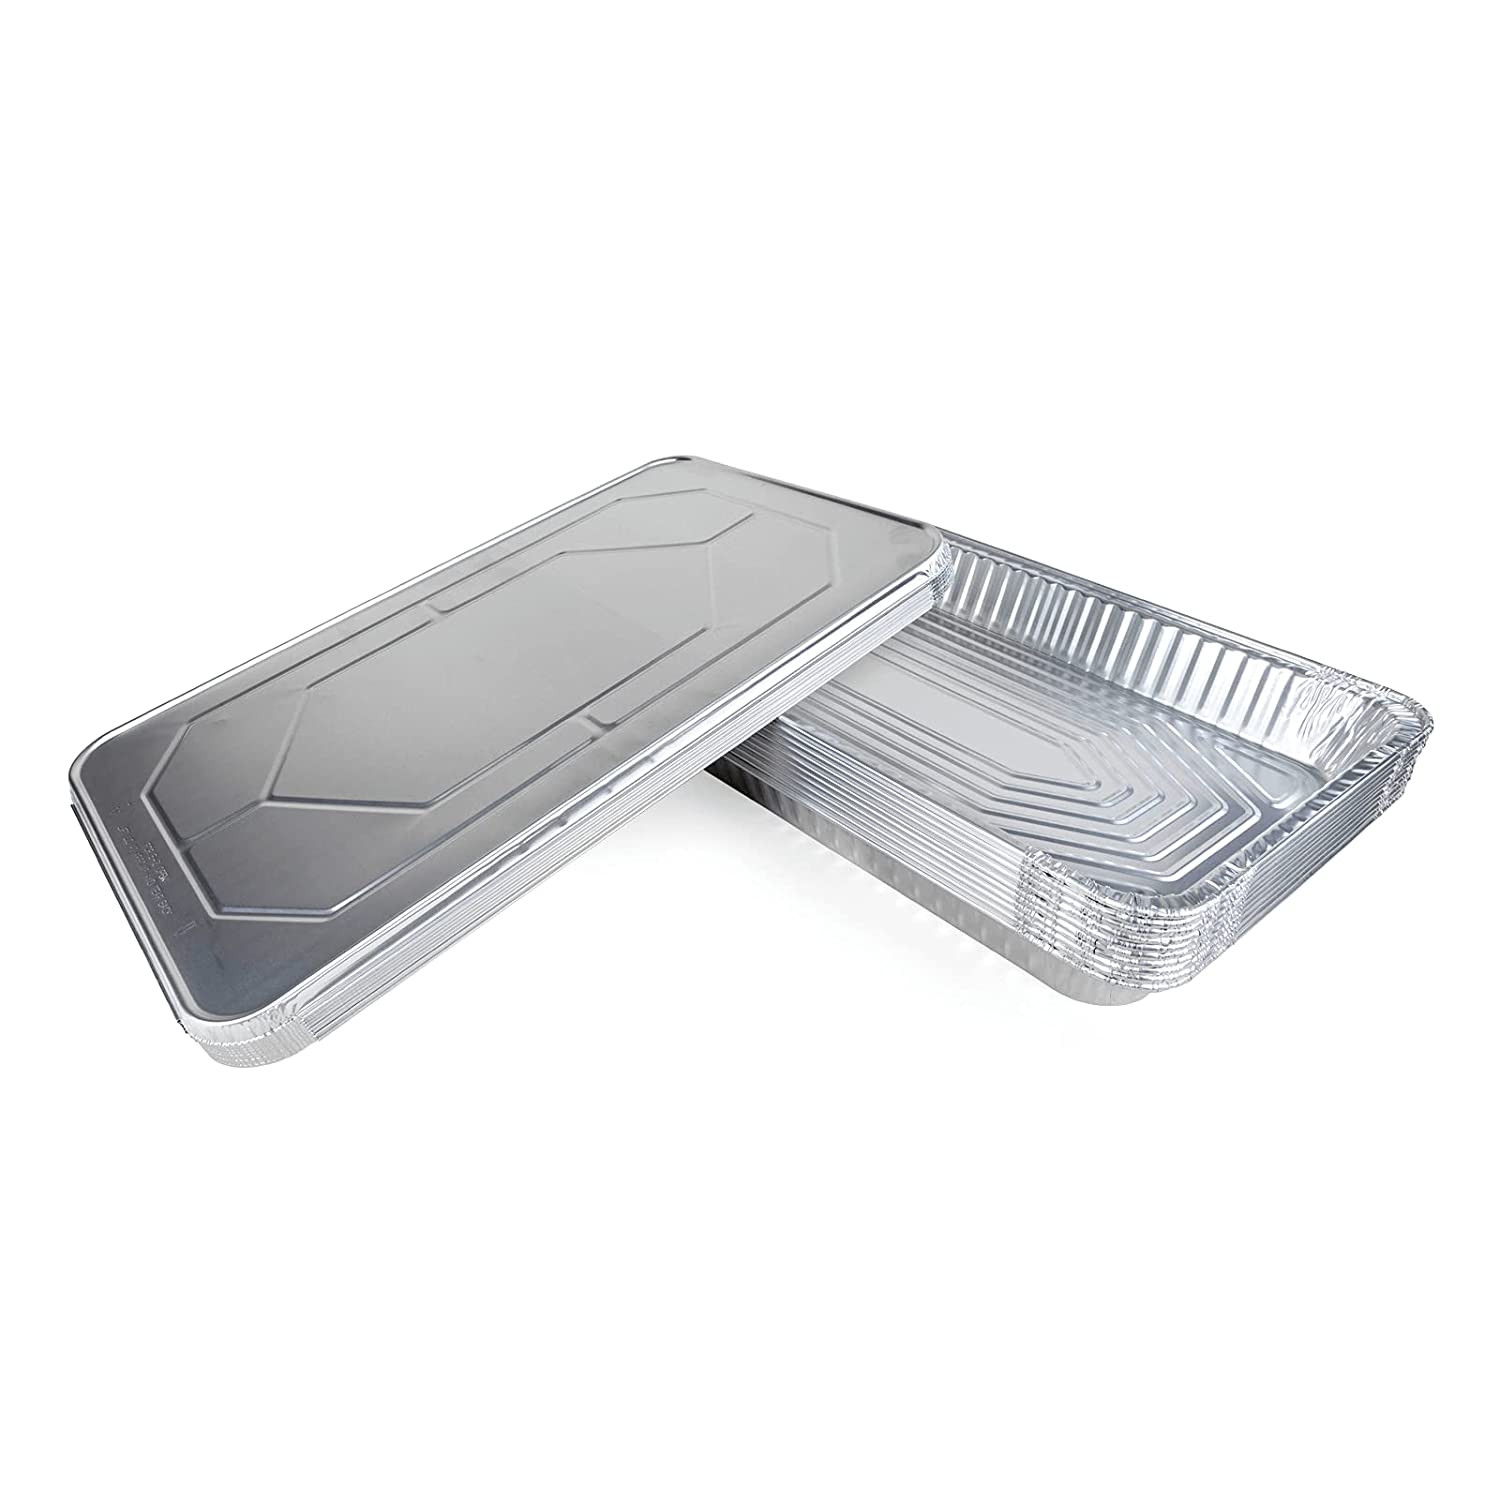 https://idlpack.com/image/cache/catalog/Products/Foil%20Pans%20and%20Trays/61cAsU-STmL._SL1500_-1500x1500.jpg